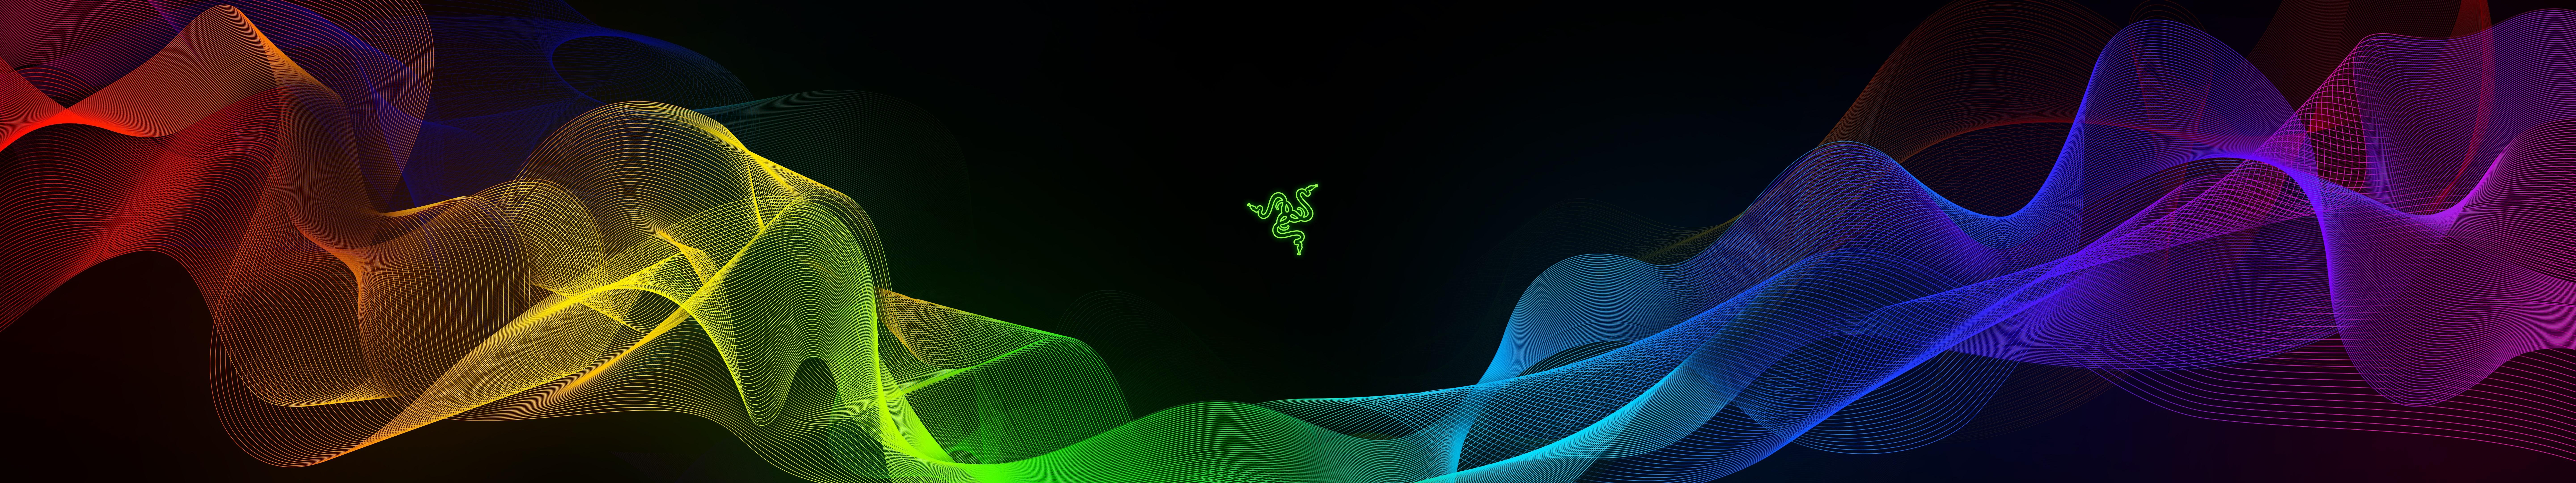 Razer 4k Wallpapers For Your Desktop Or Mobile Screen Free And Easy To Download